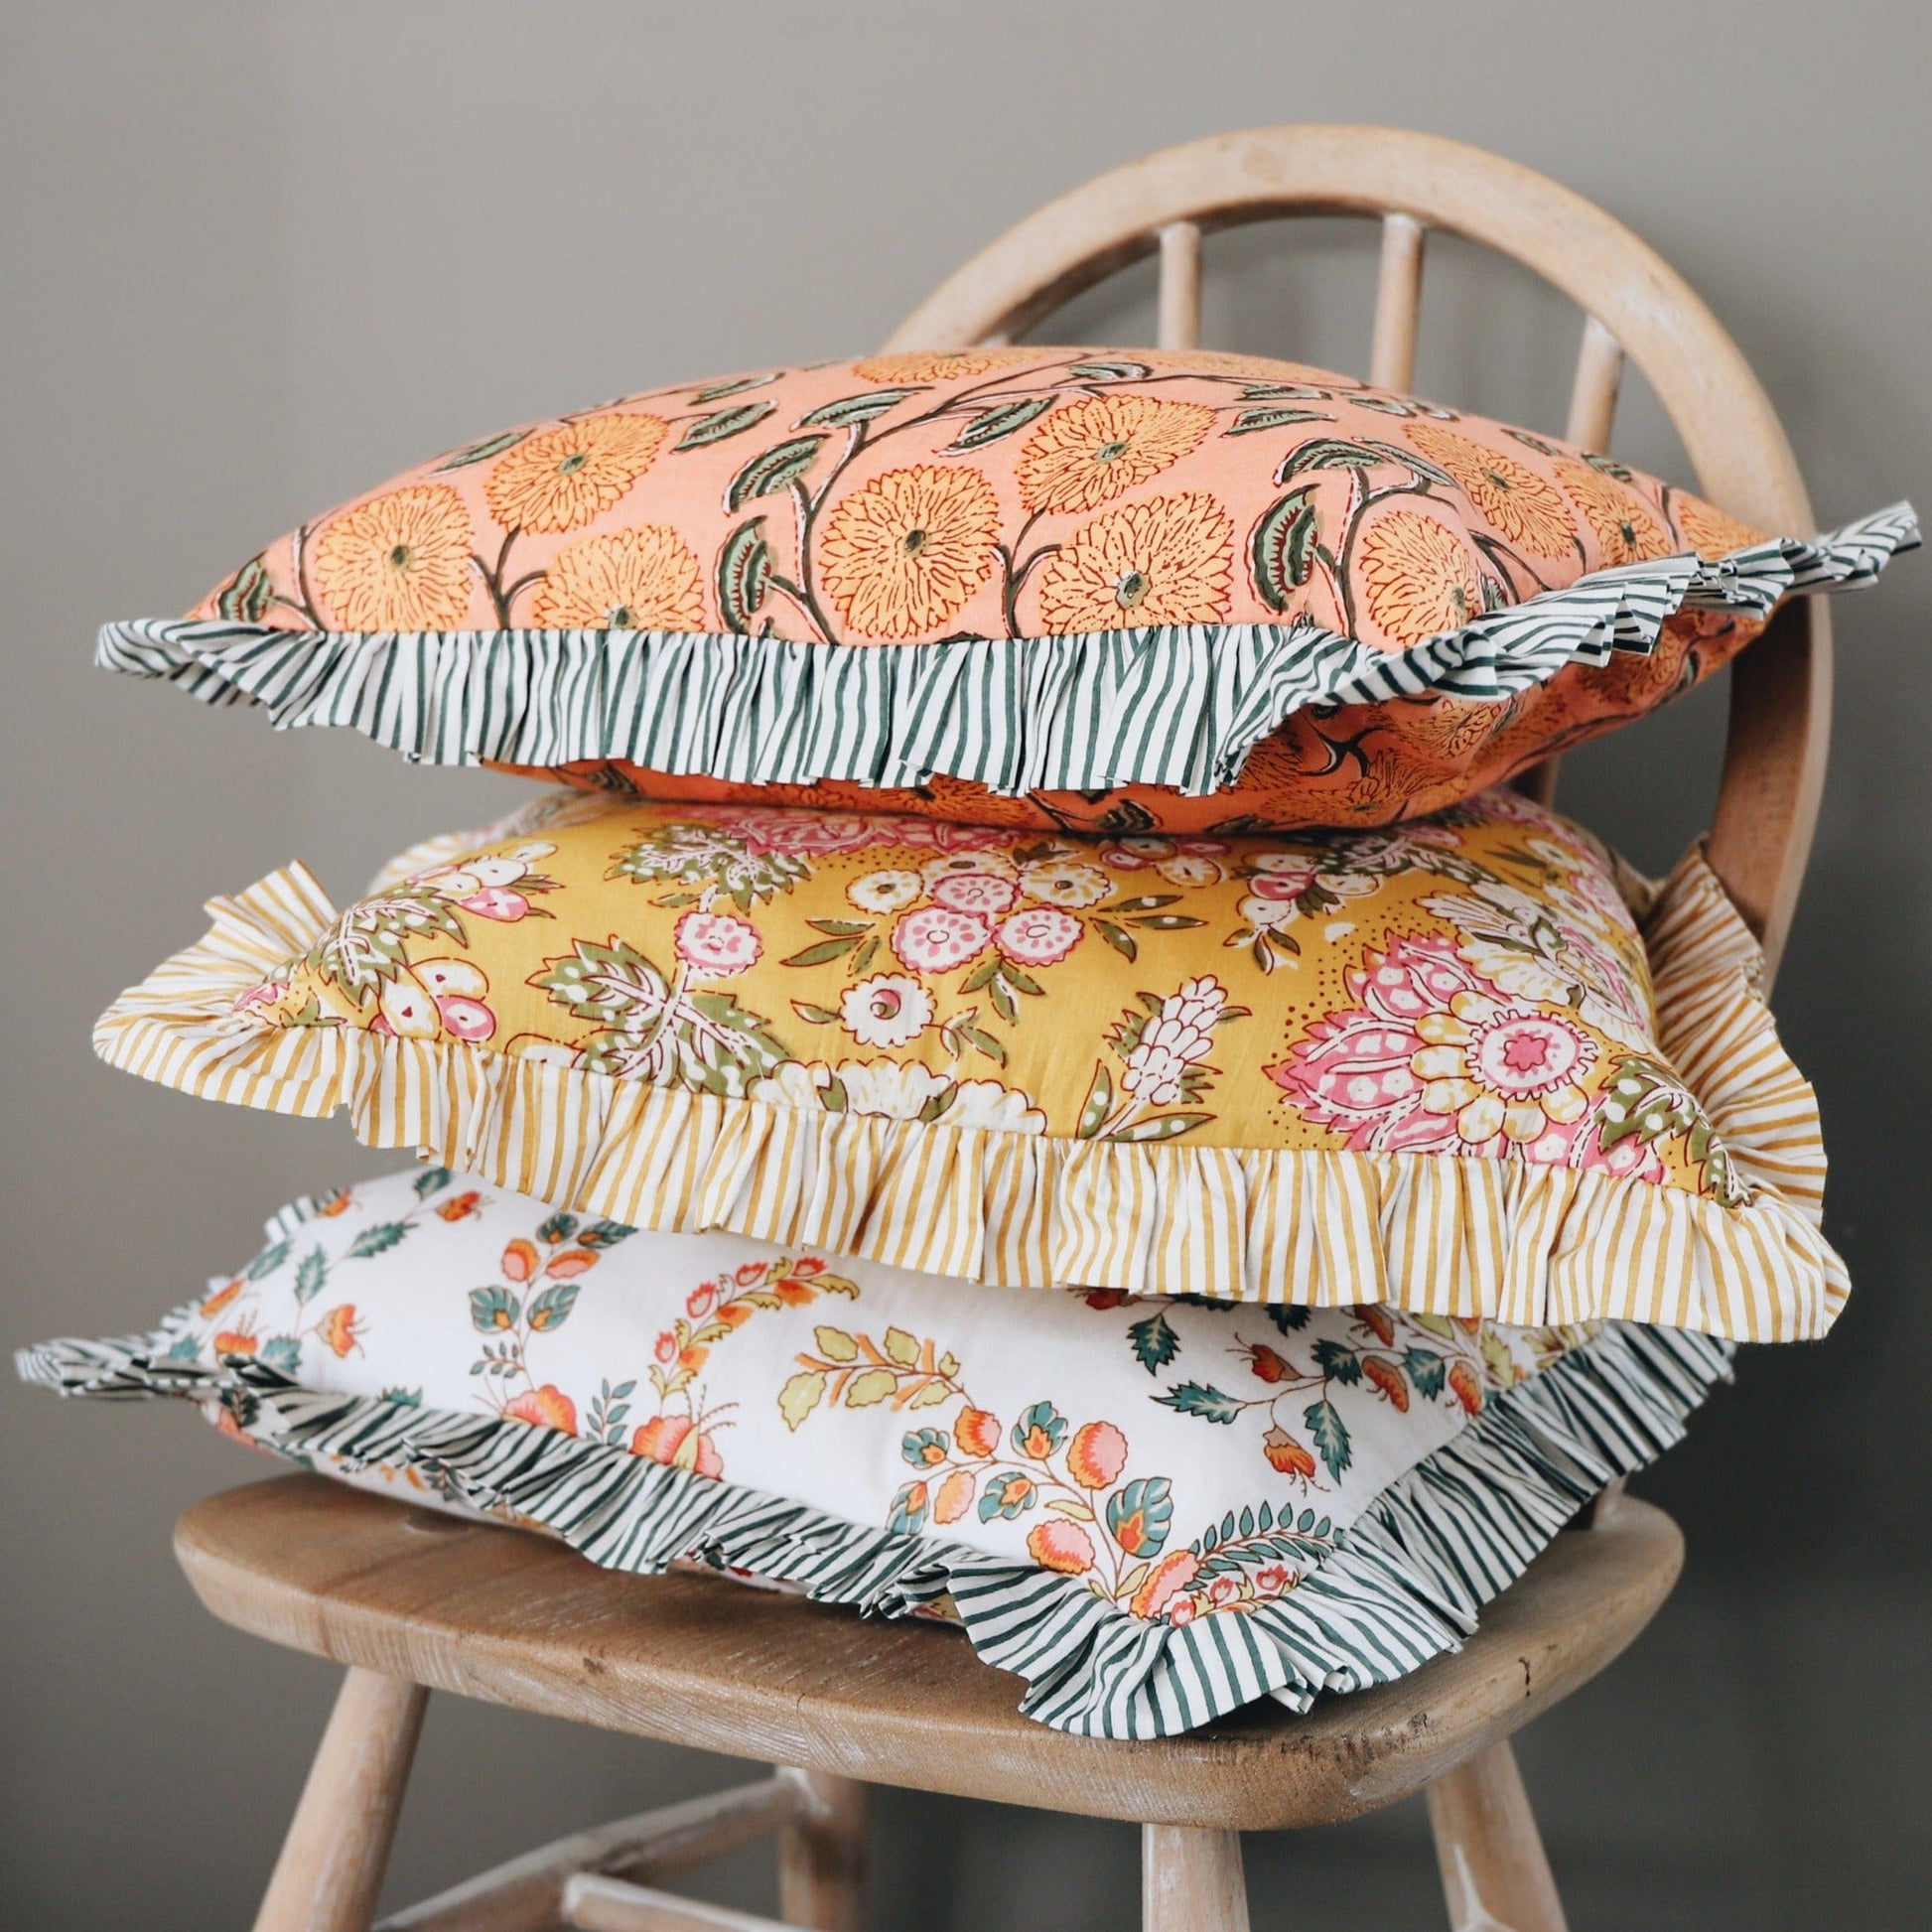 Cushions Small Ruffle Cushion - Apricot and Gold Flowers on White 19476